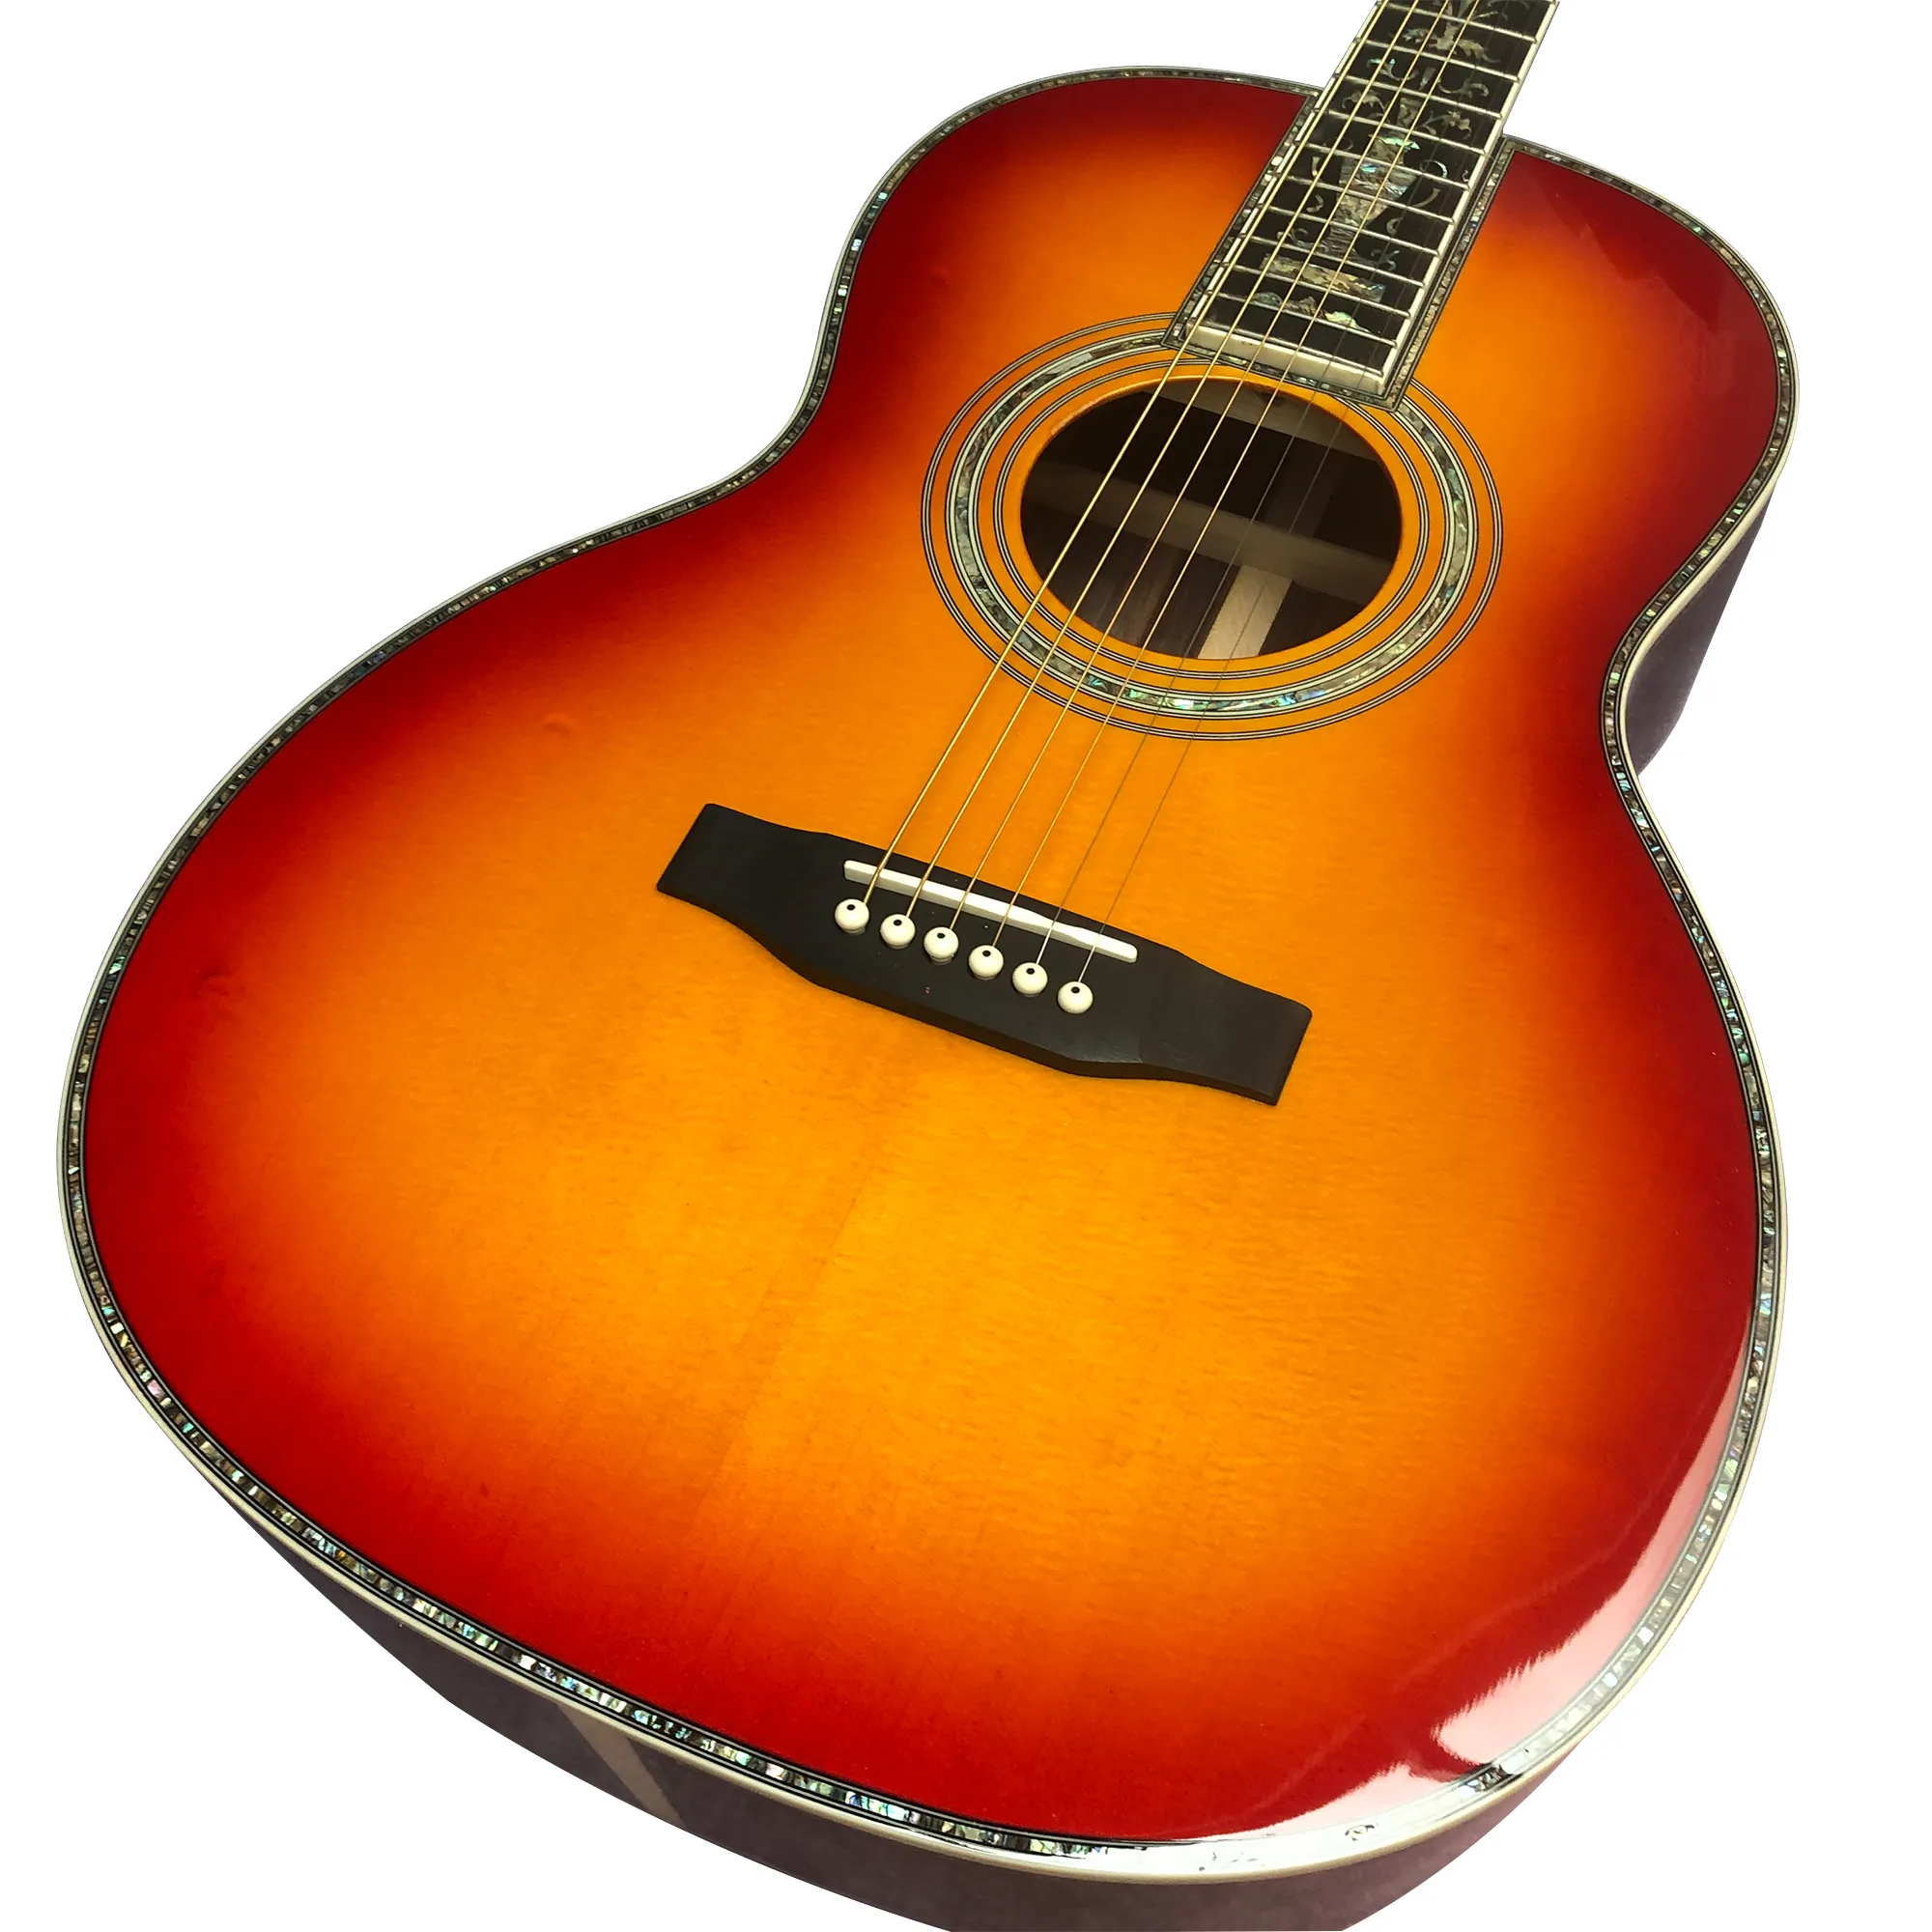 39-inch ooo mold sunset red black fingered abalone shell inlaid acoustic guitar